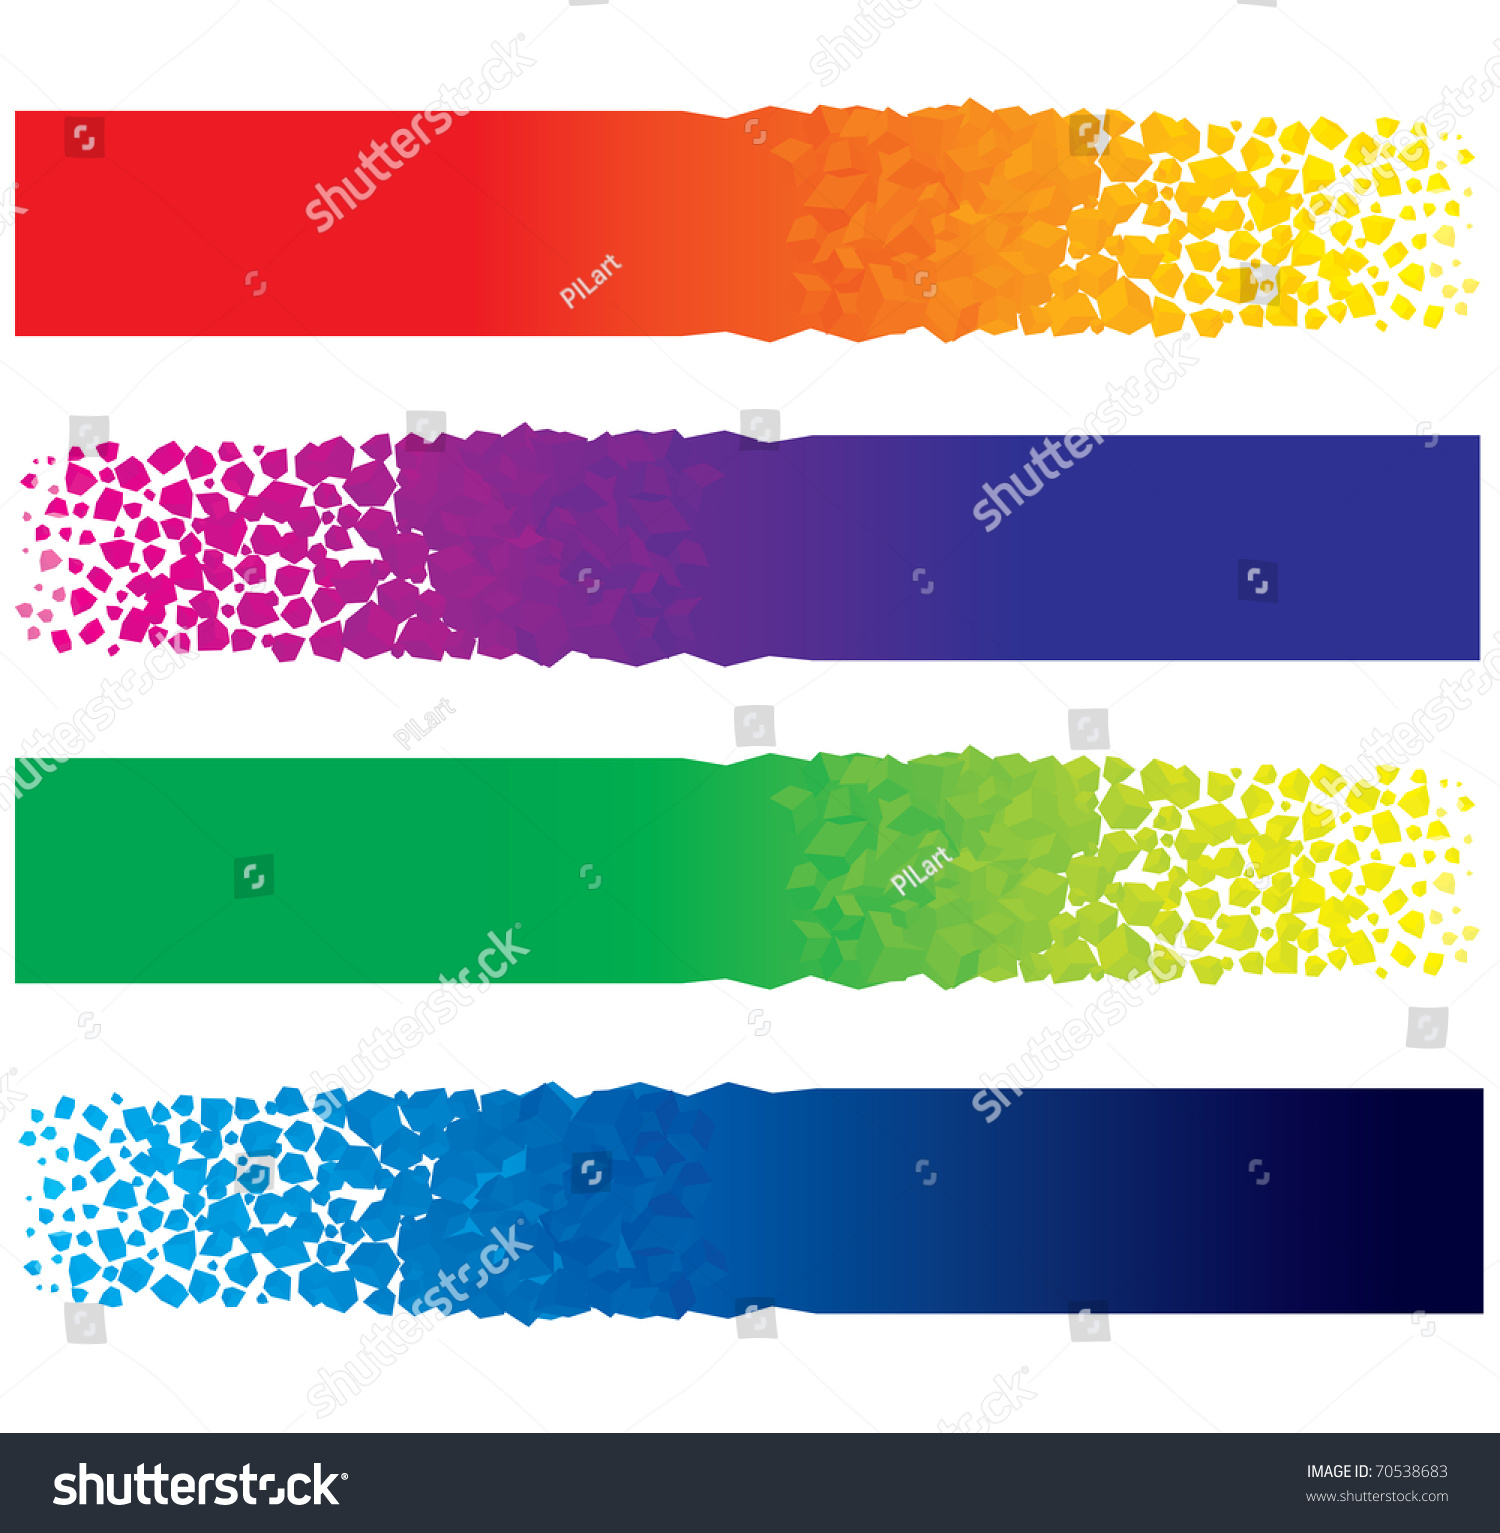 Bright Digital Web  Banners  Cool  Abstract Stock Vector 